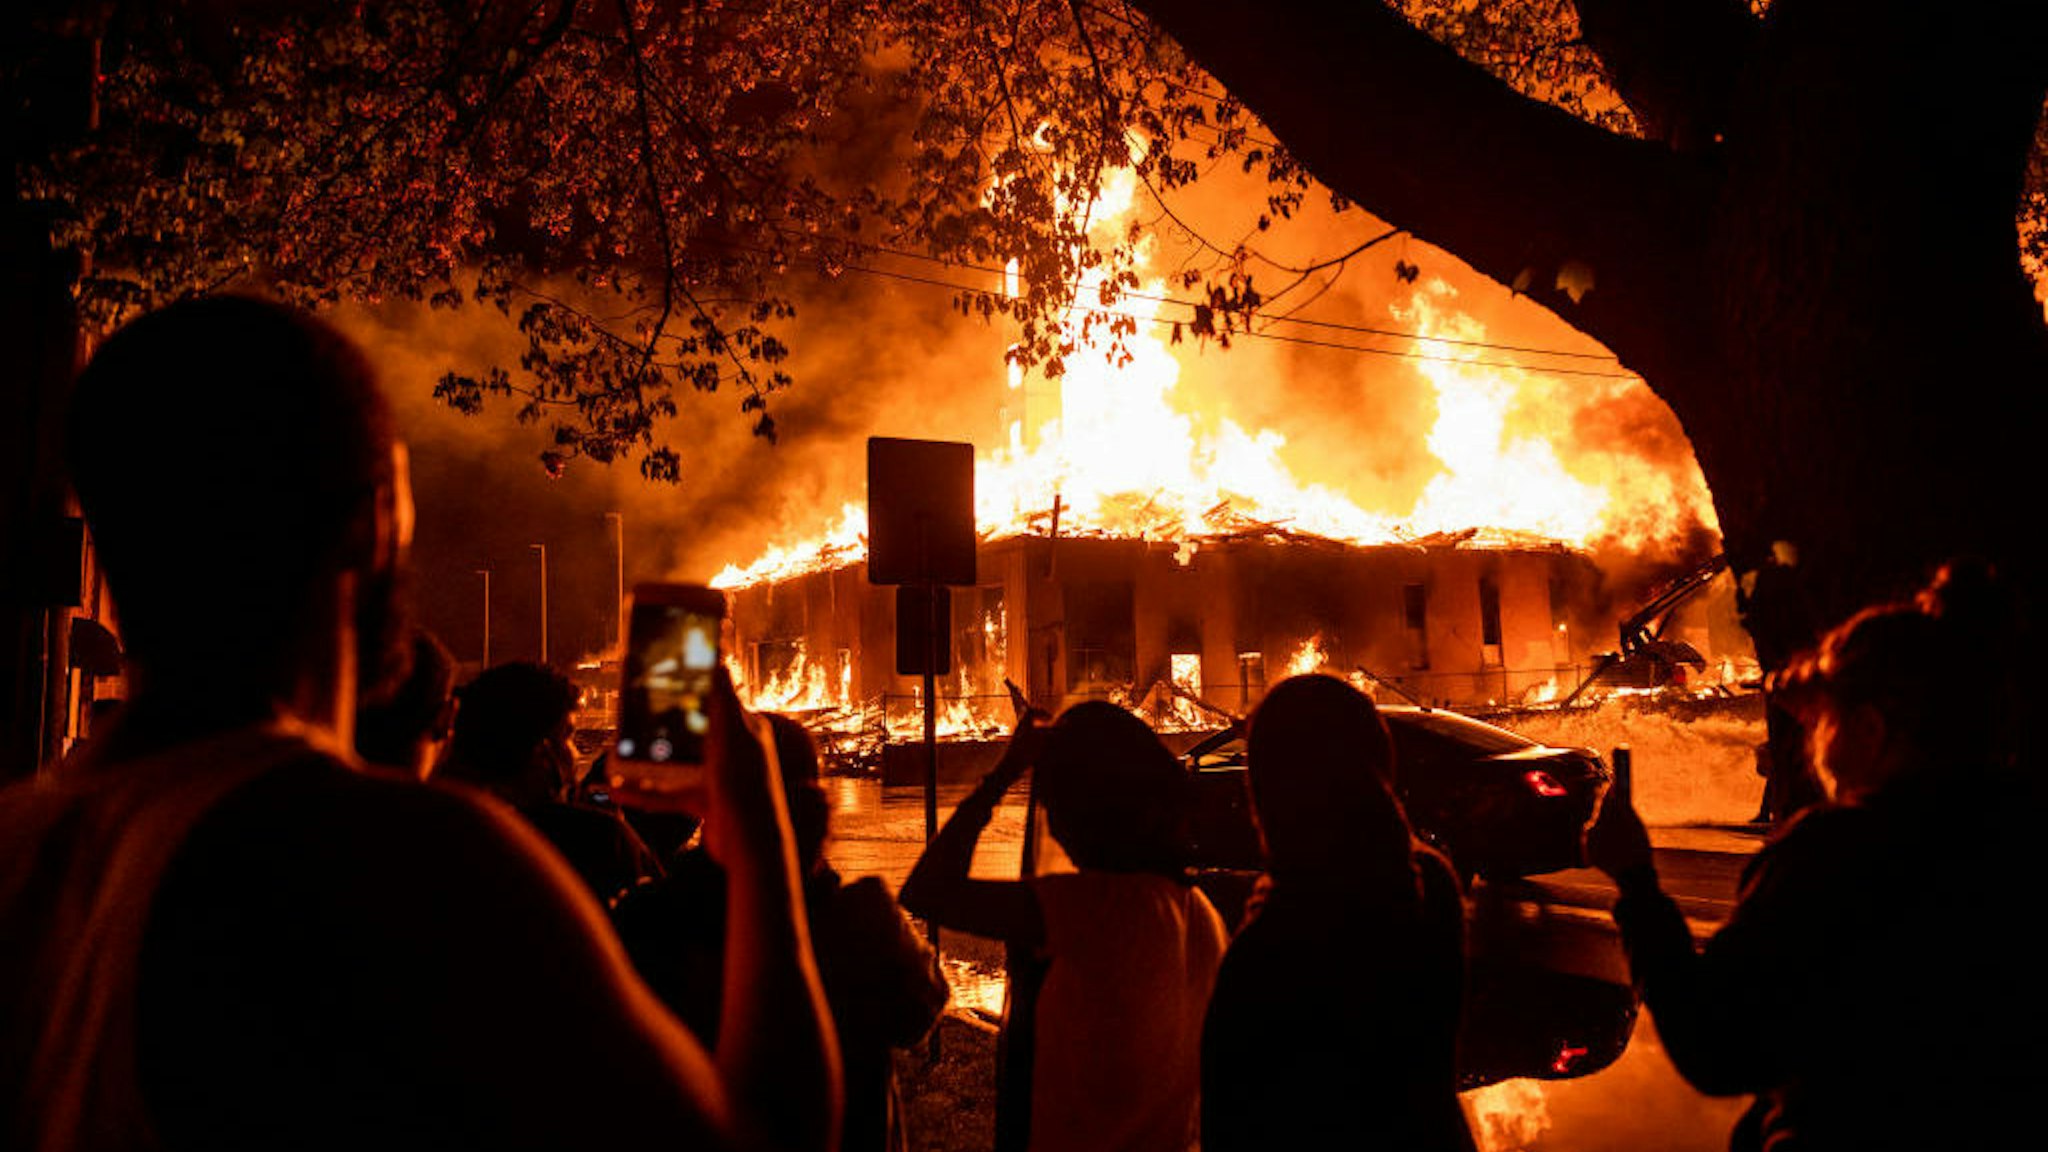 People look on as a construction site burns in a large fire near the Third Police Precinct on May 27, 2020 in Minneapolis, Minnesota. A number of businesses and homes were damaged as the area has become the site of an ongoing protest after the police killing of George Floyd. Four Minneapolis police officers have been fired after a video taken by a bystander was posted on social media showing Floyd's neck being pinned to the ground by an officer as he repeatedly said, "I can‚Äôt breathe". Floyd was later pronounced dead while in police custody after being transported to Hennepin County Medical Center. (Photo by Stephen Maturen/Getty Images)